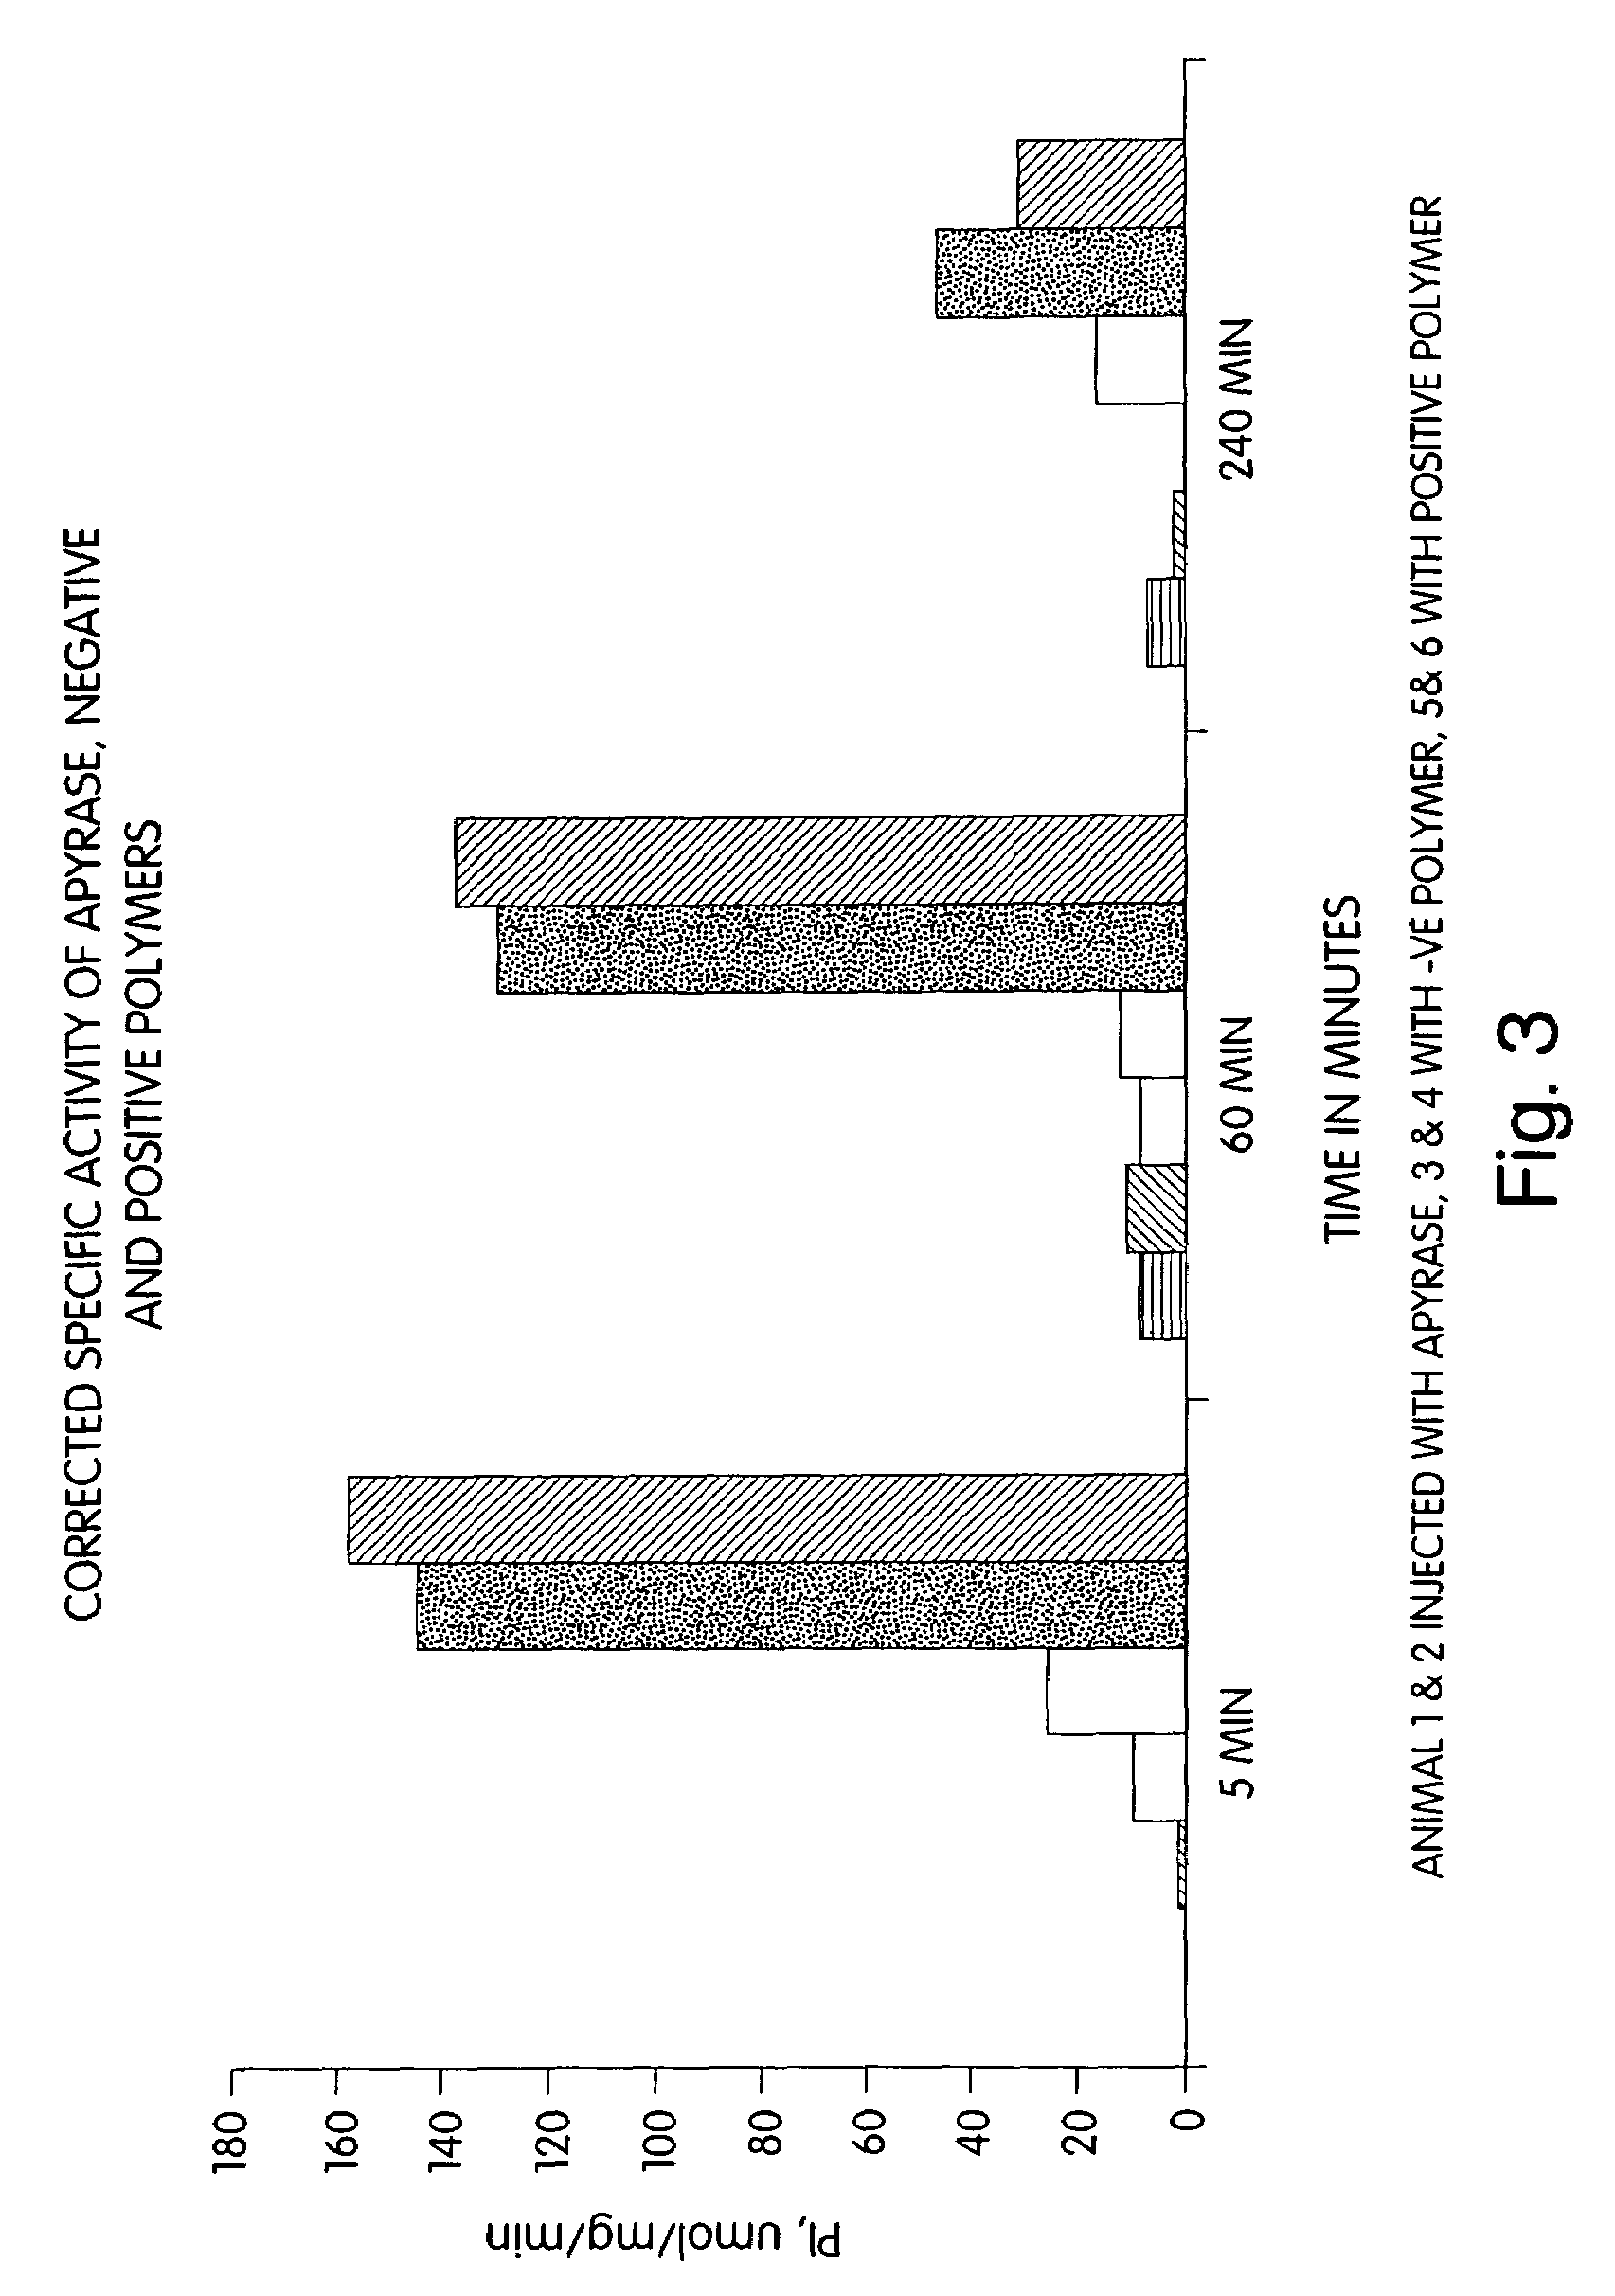 Conjugates comprising a biodegradable polymer and uses therefor